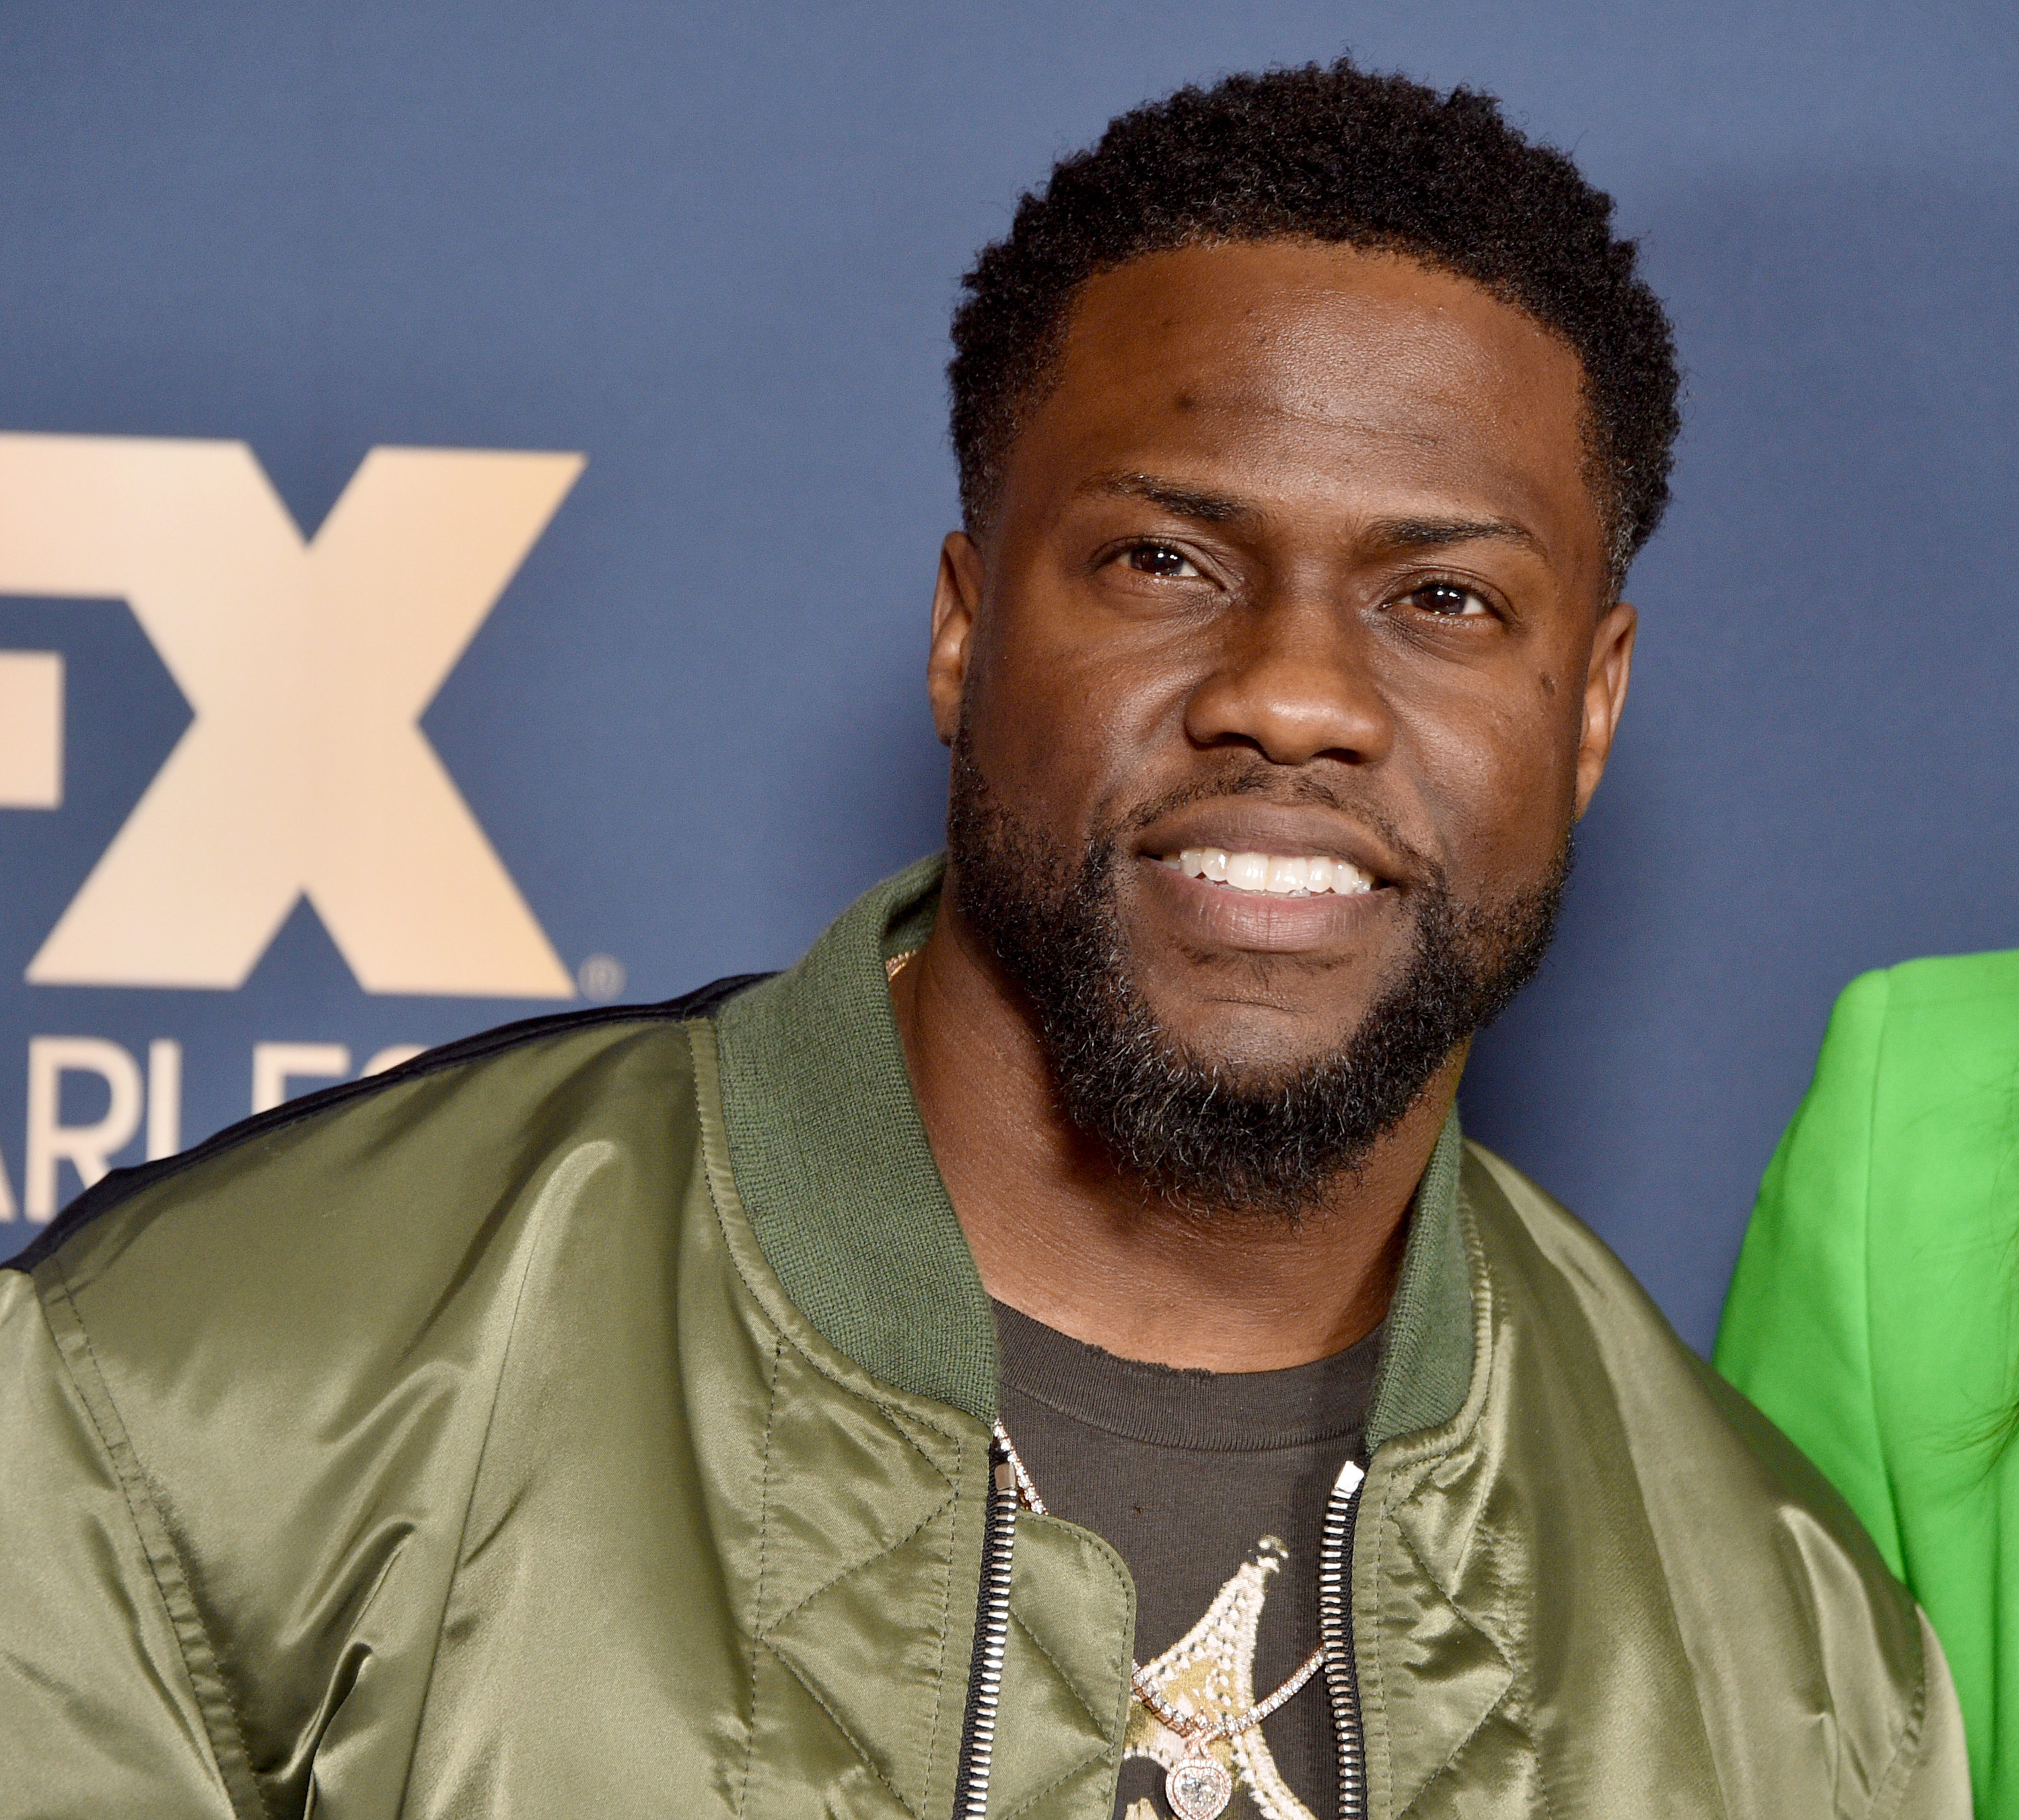 Kevin Hart is pictured at a press event in Pasadena, California, in 2020